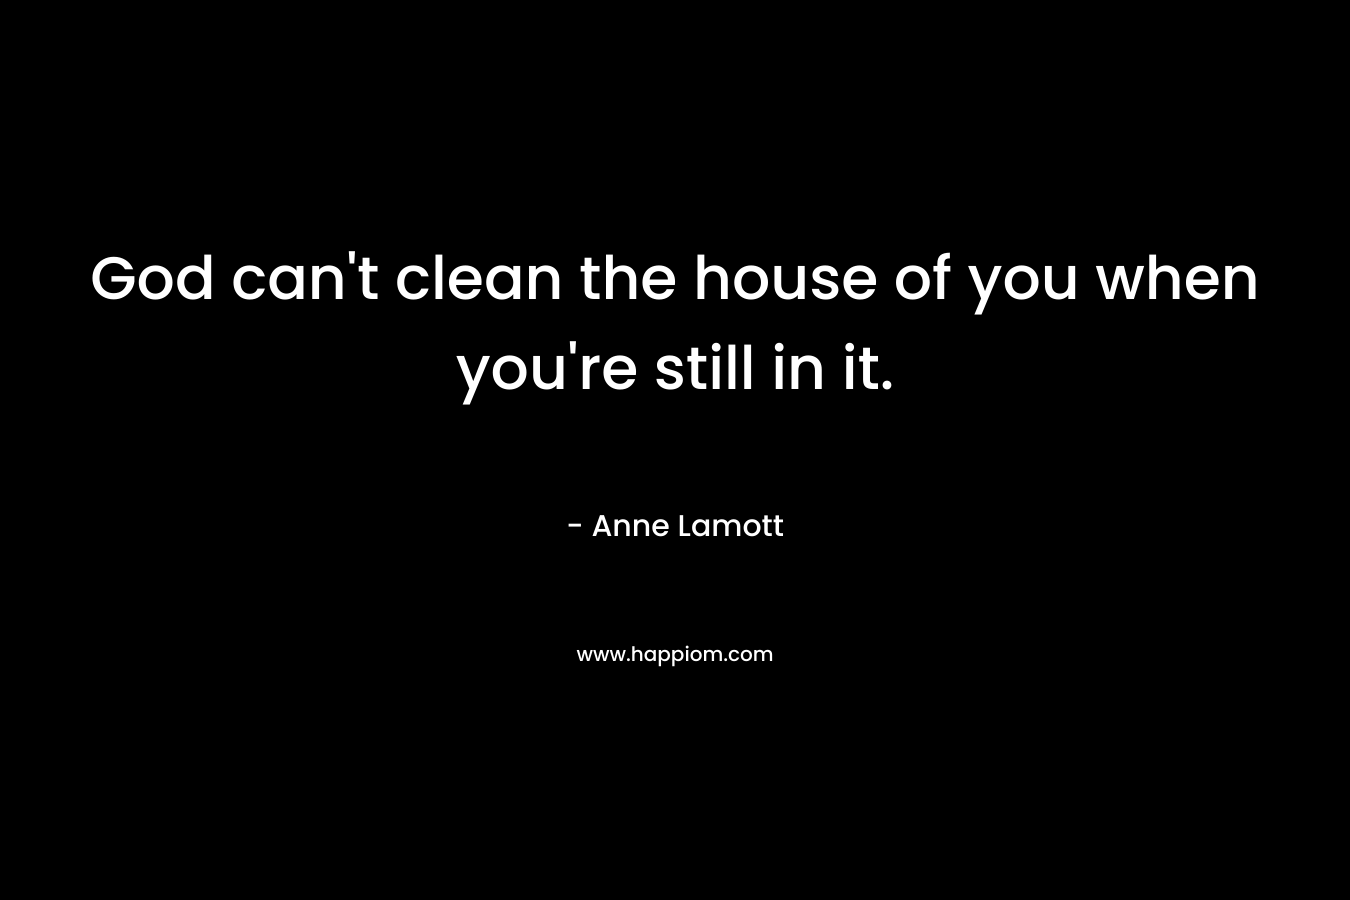 God can't clean the house of you when you're still in it.